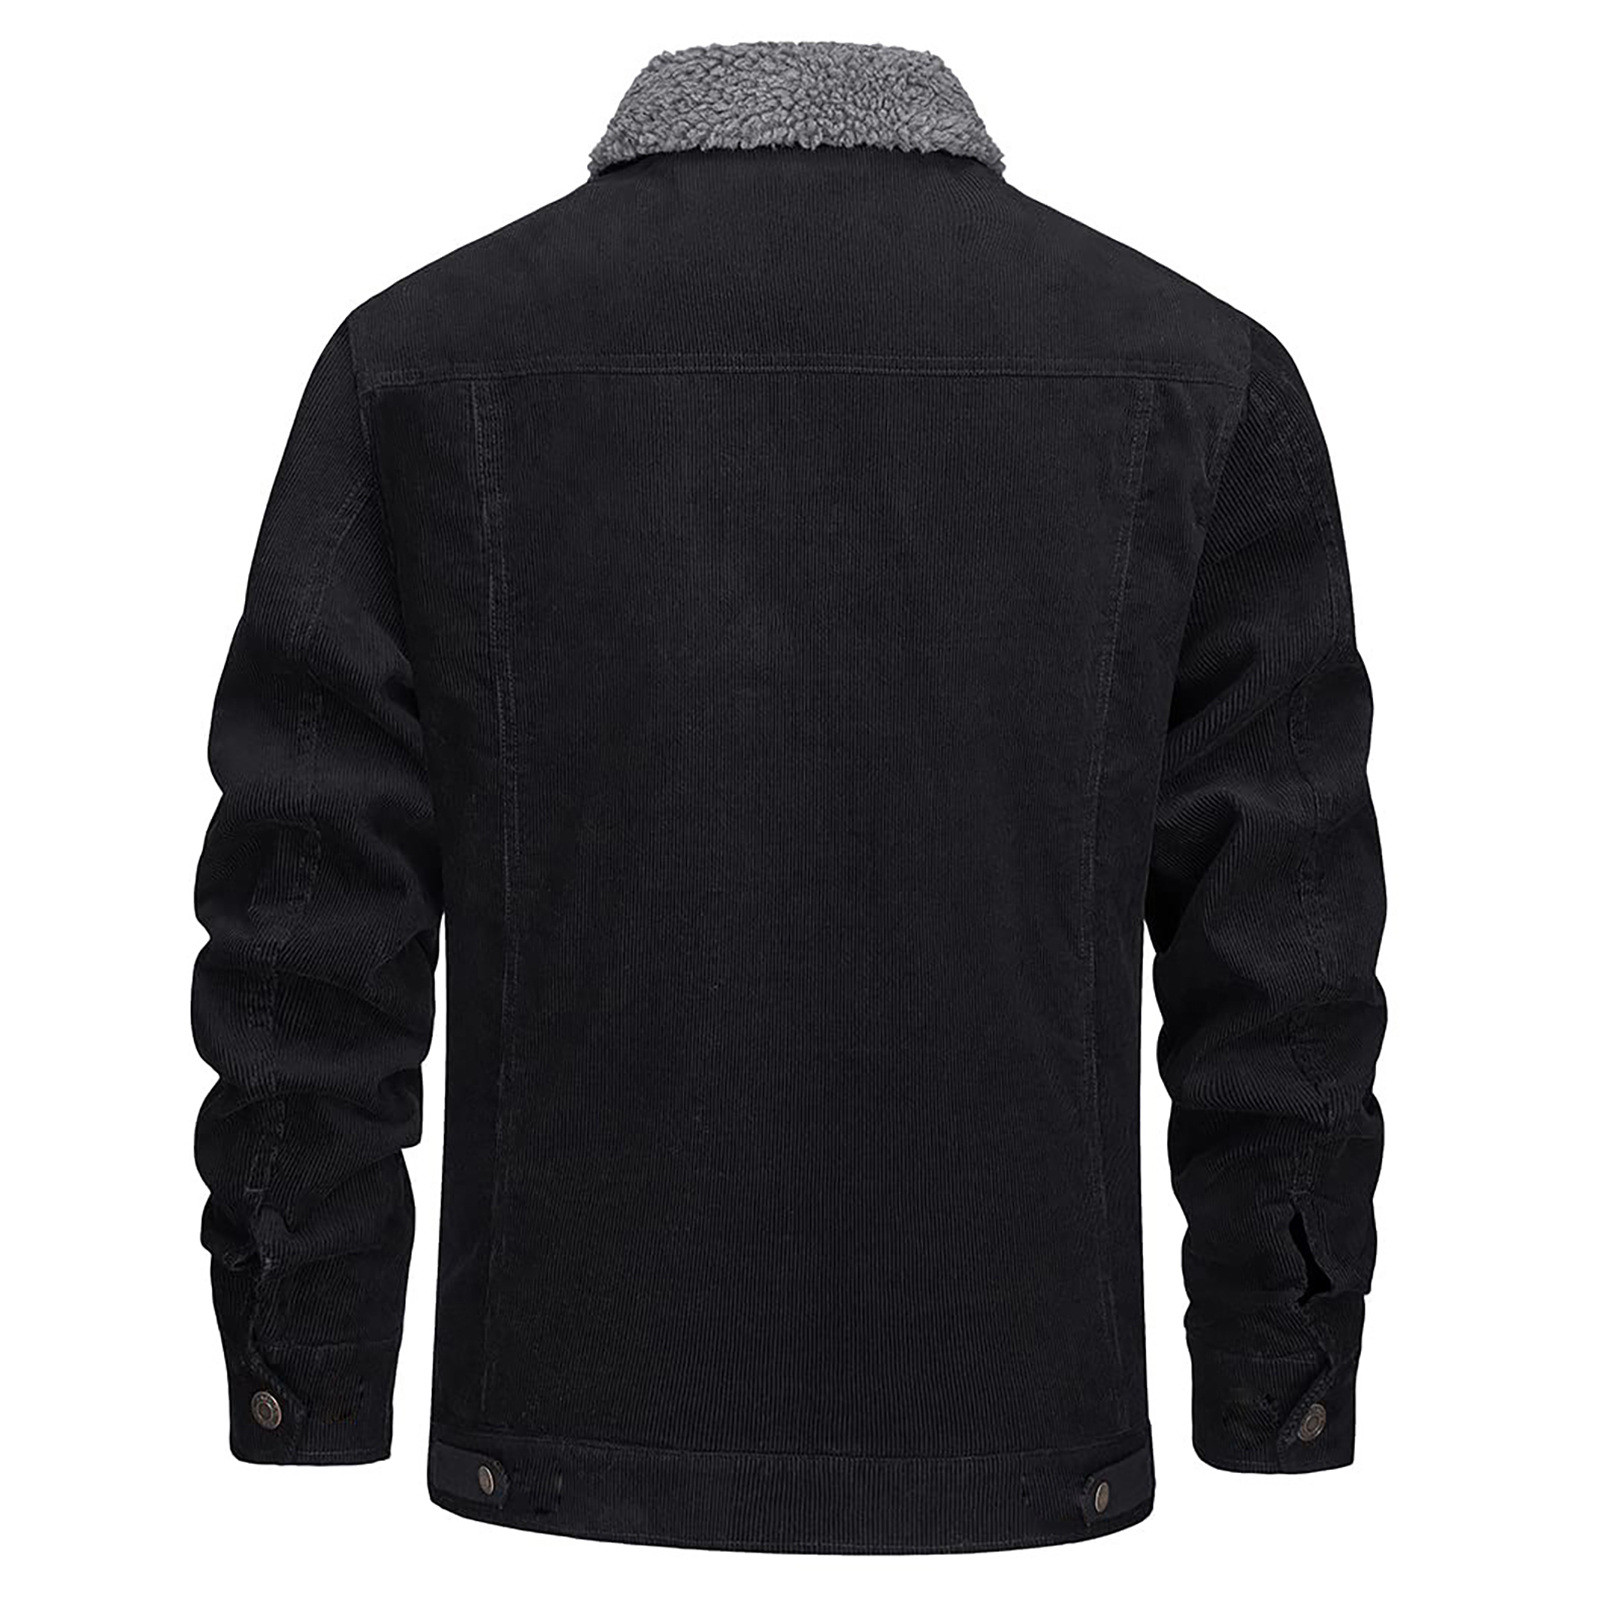 Mens Fashion Simple Solid Pocket Cardigan Button Sweater Jacket Light ...